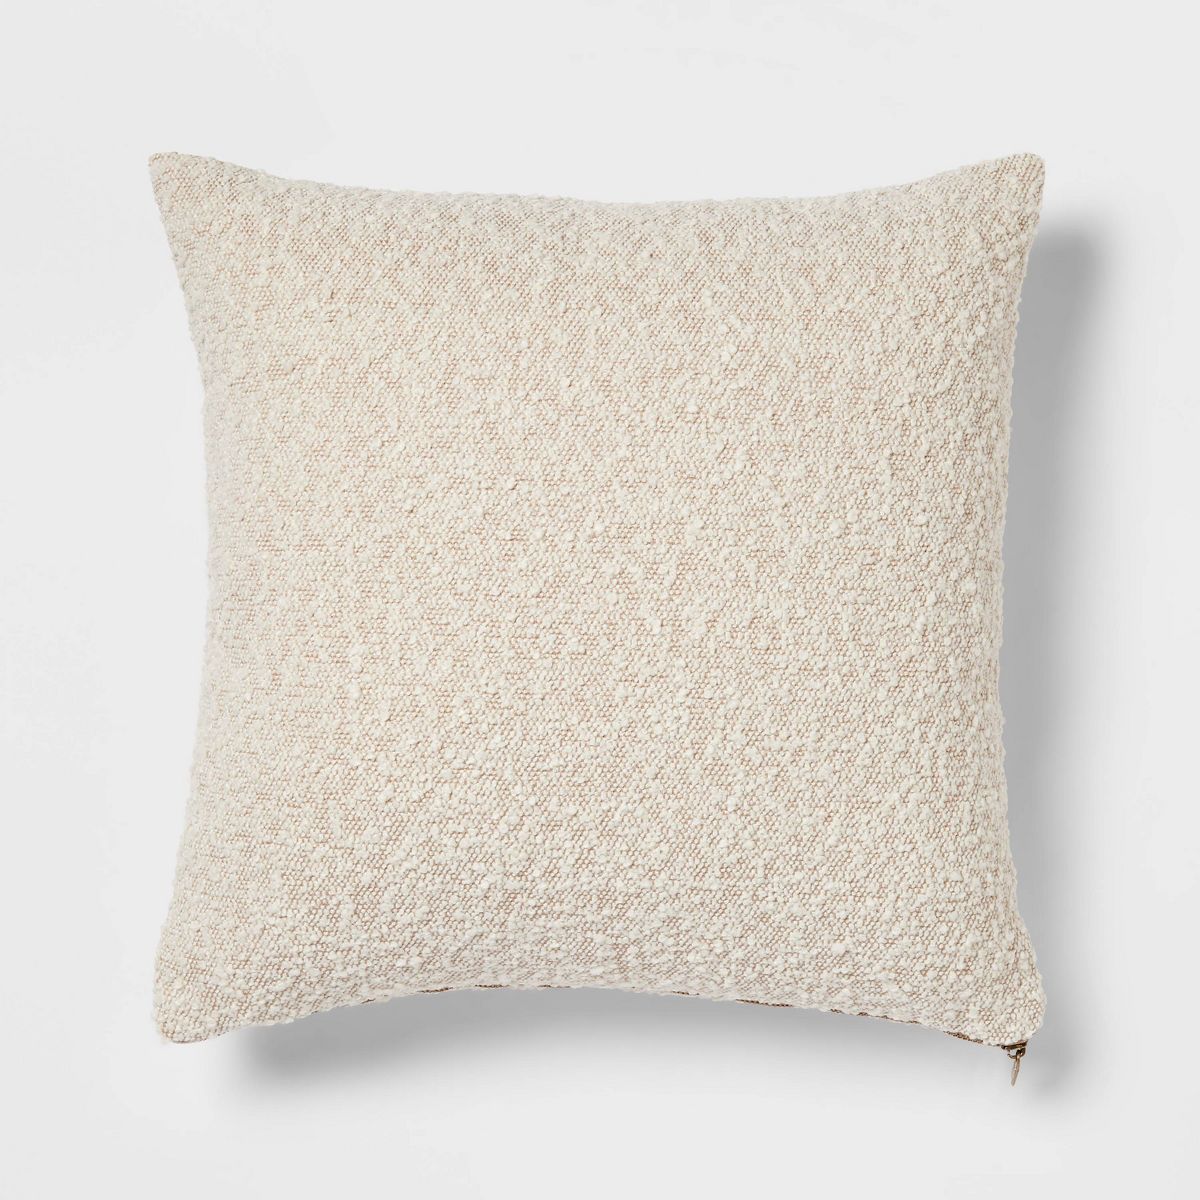 Woven Boucle Square Throw Pillow with Exposed Zipper Neutral - Threshold™ | Target